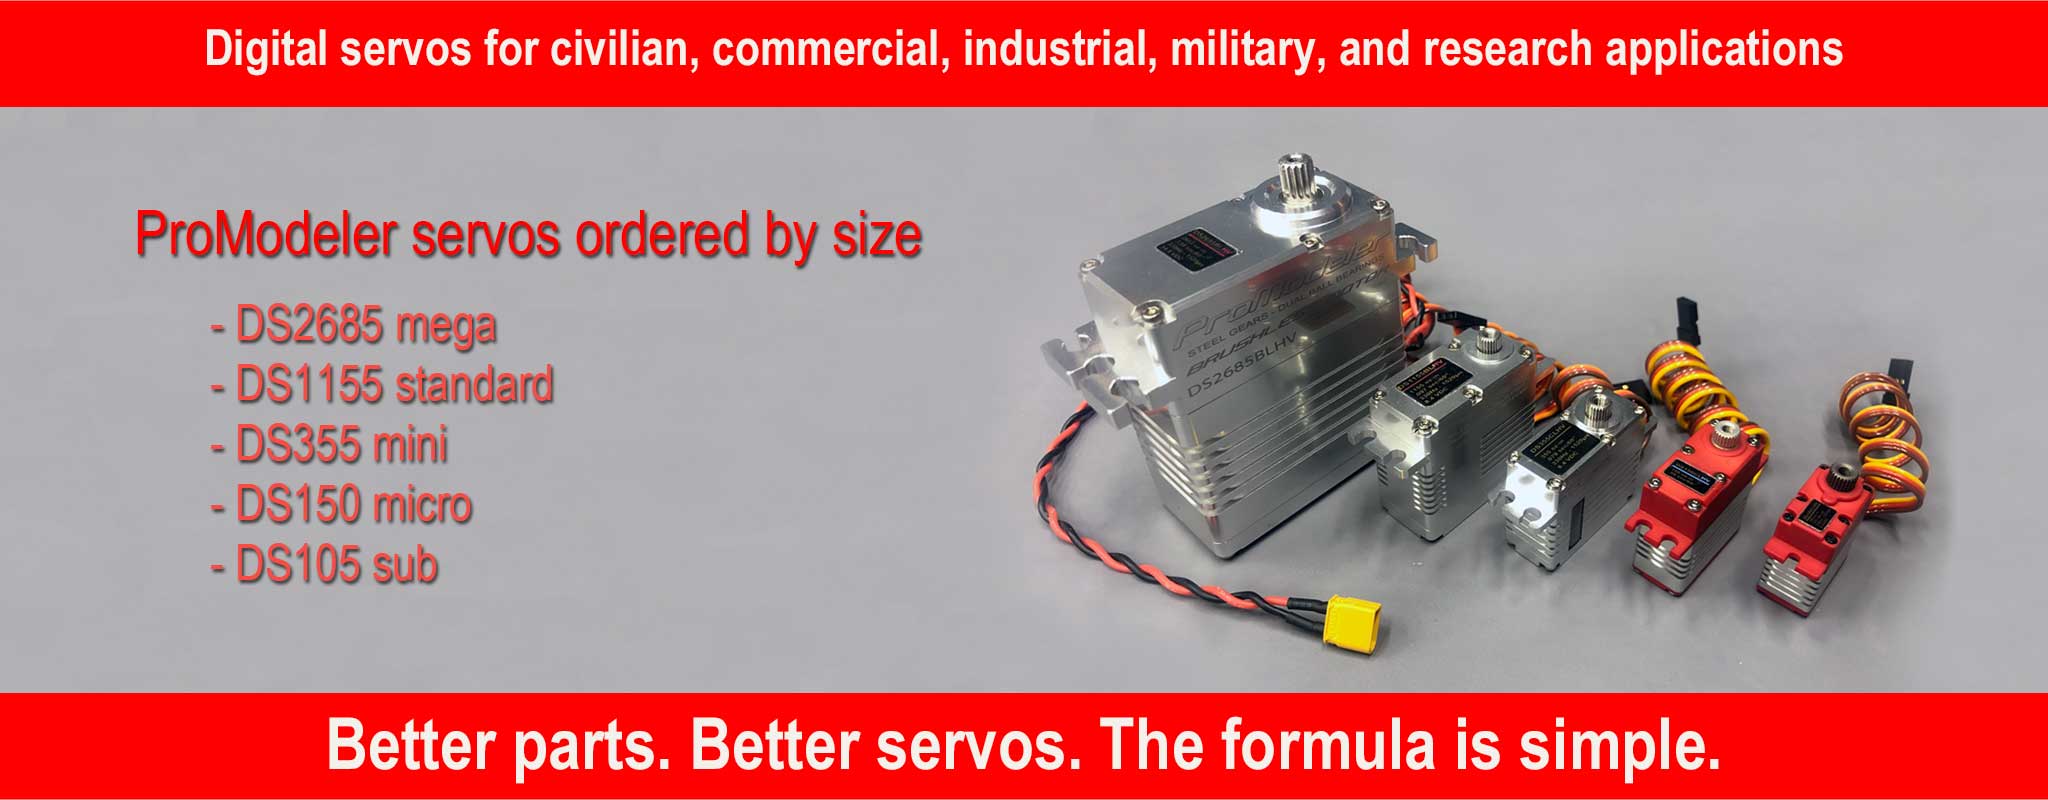 ProModeler servos ordered by size from largest to smallest